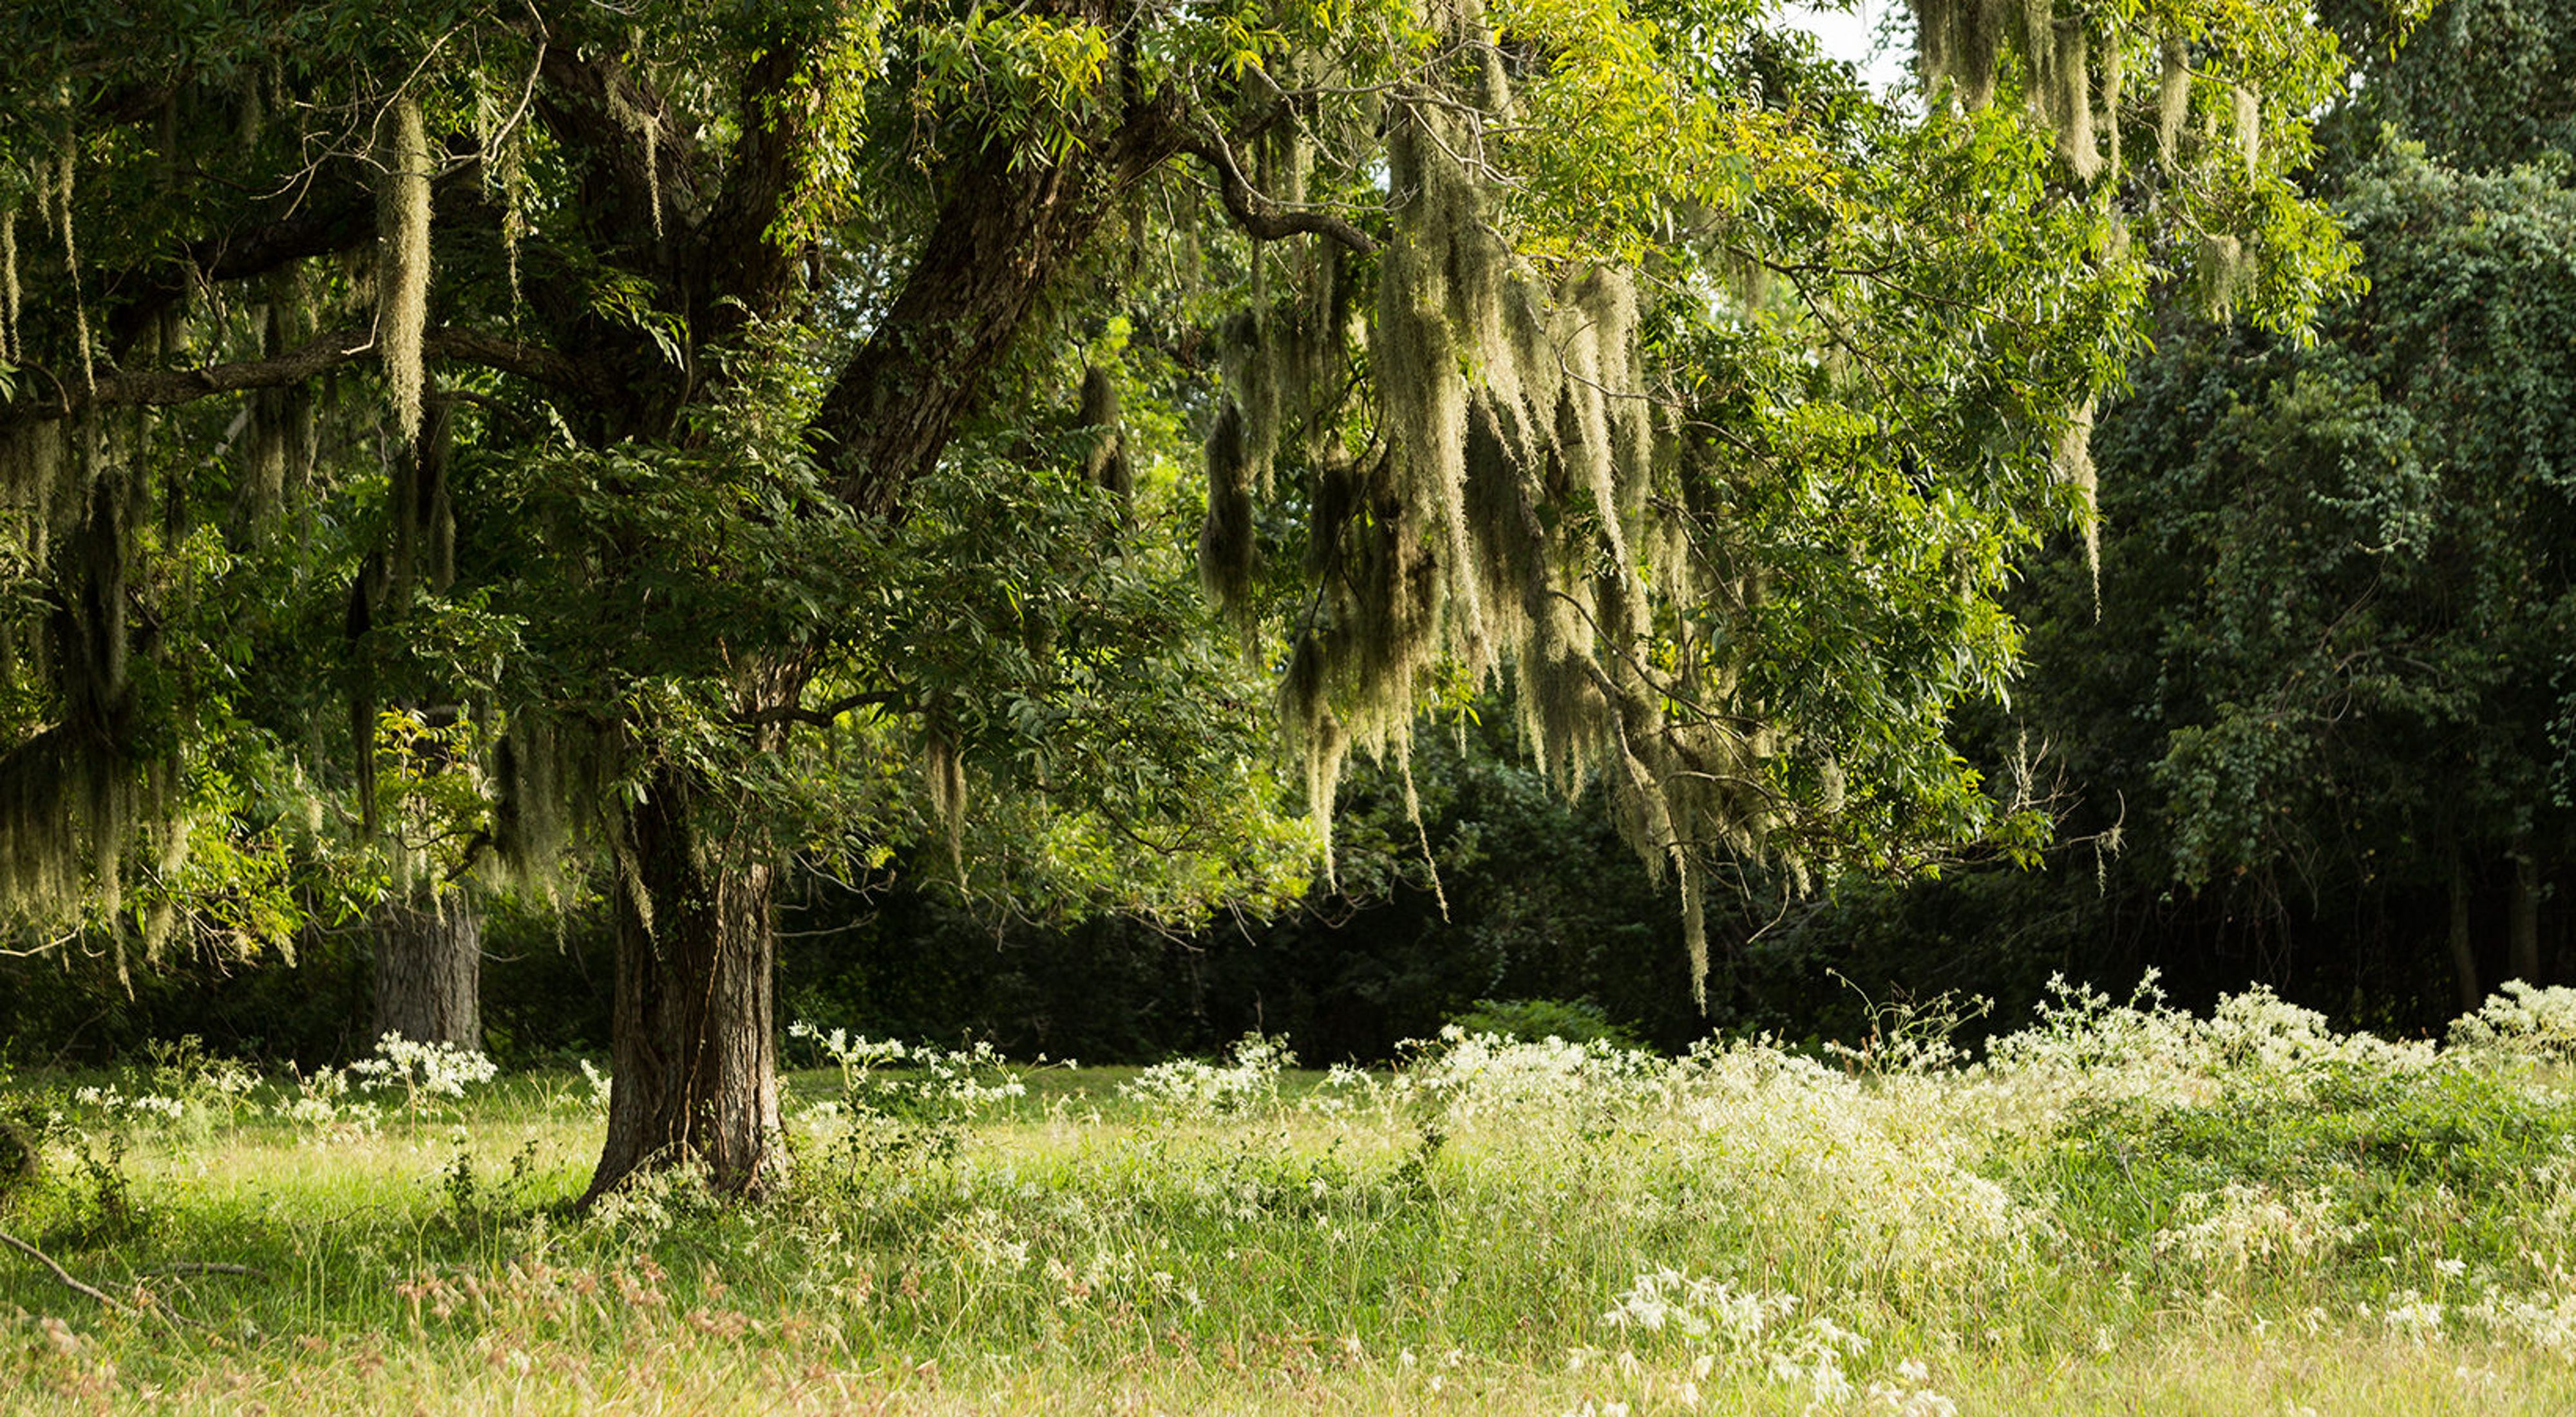 green-leaved live oak tree stands in meadow with Spanish moss hanging from its branches